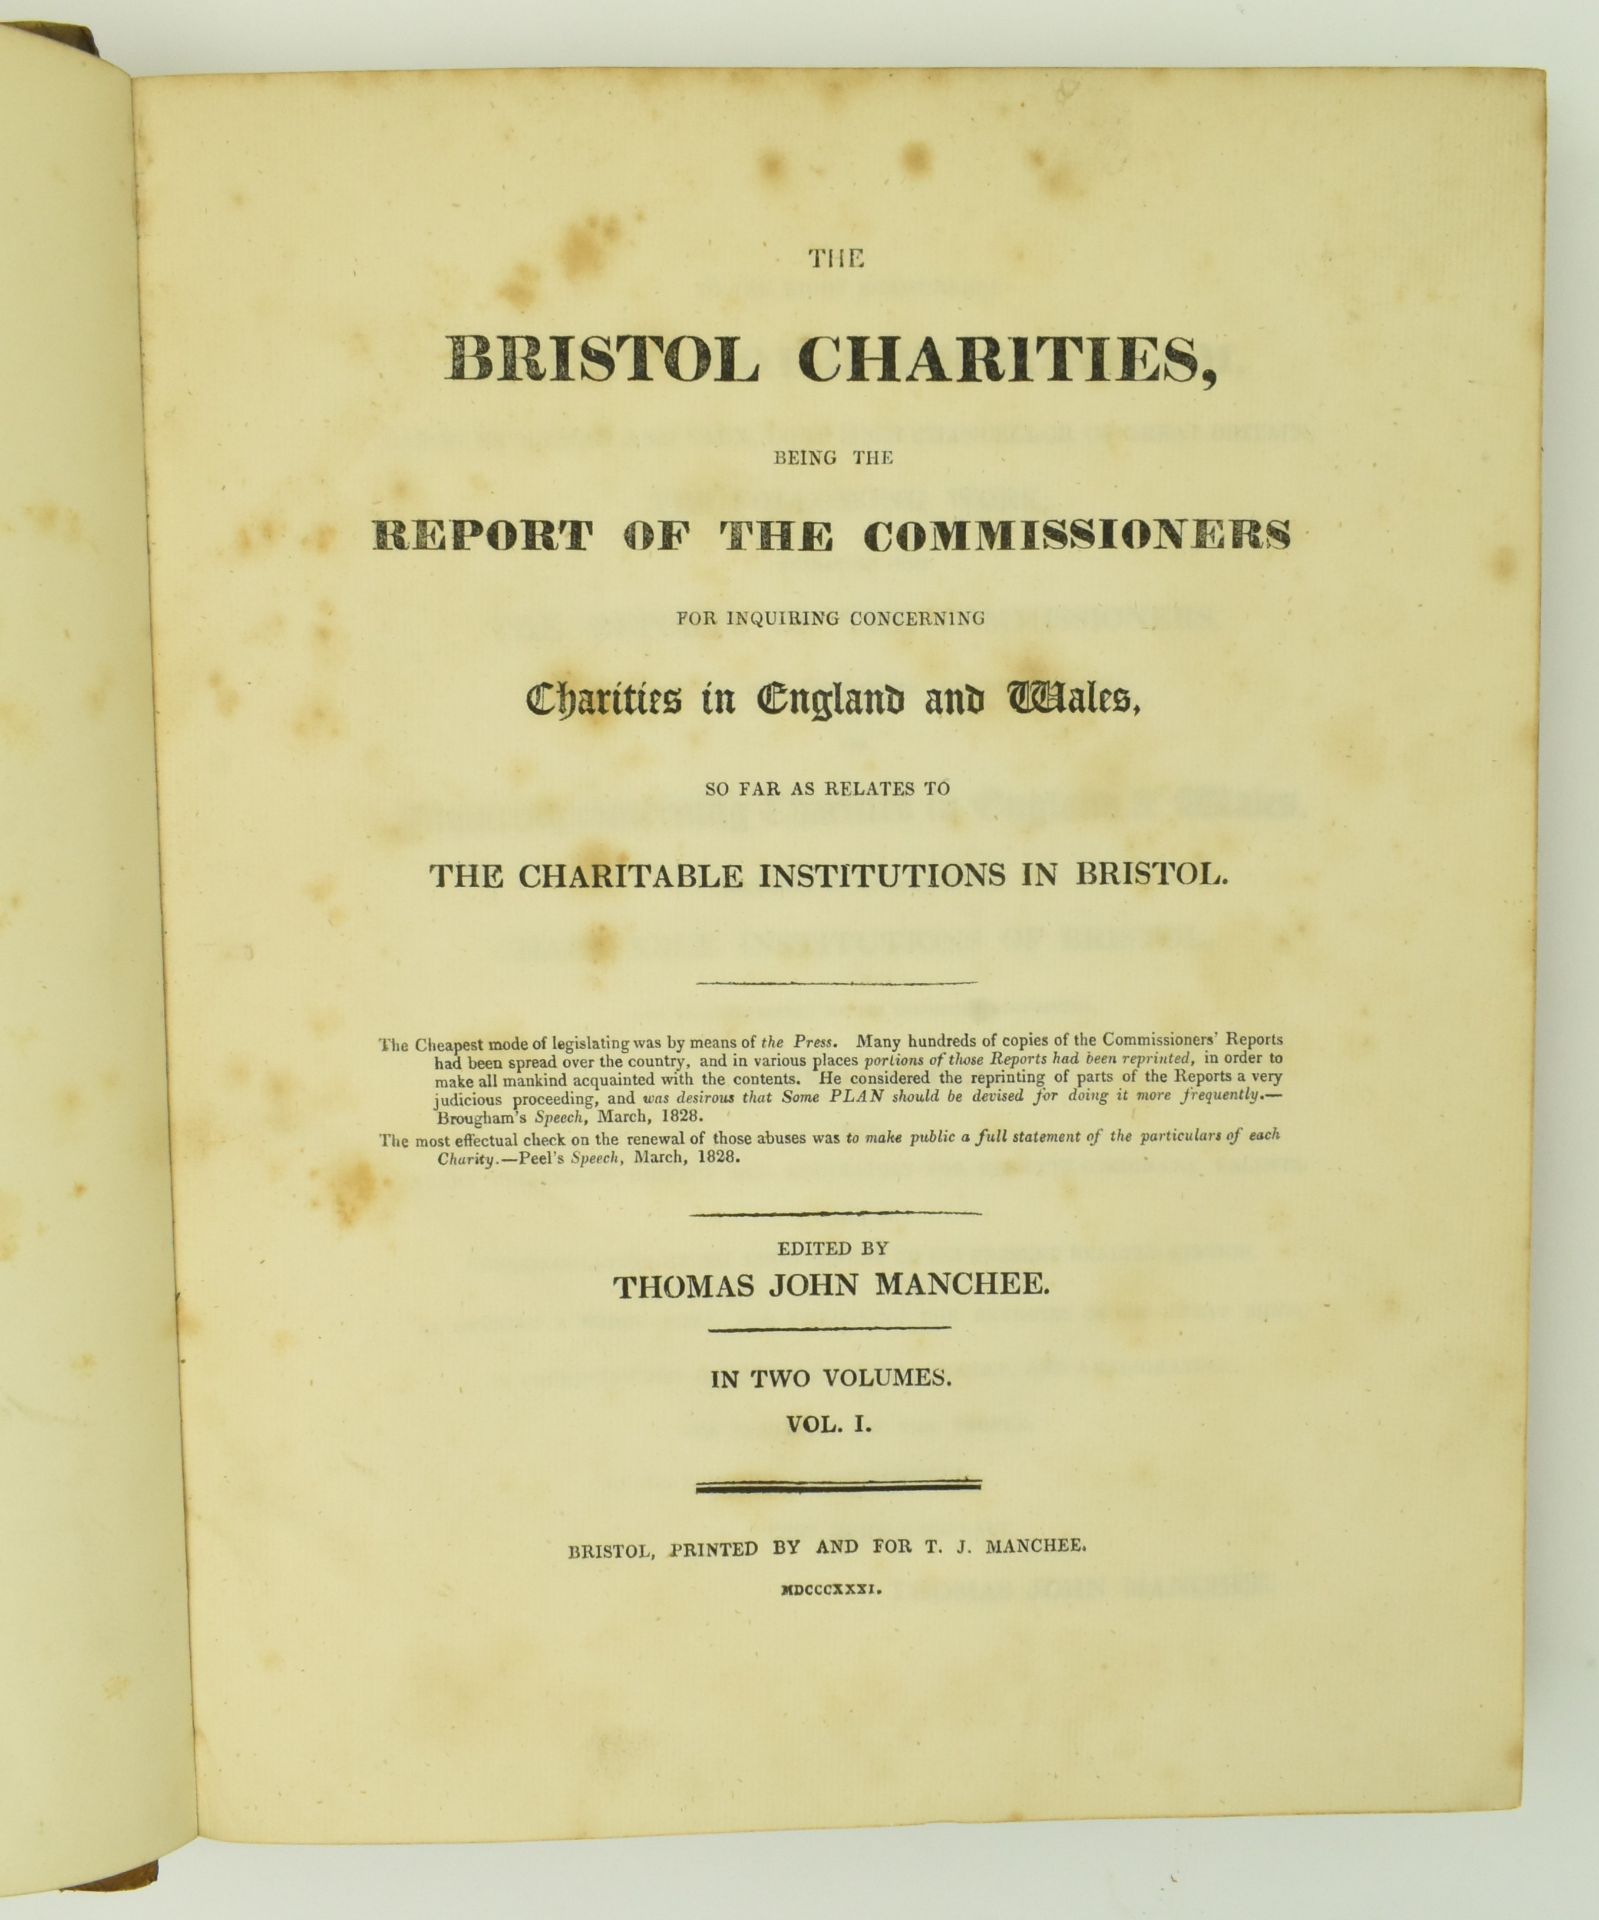 BRISTOL LOCAL INTEREST. 1831 THE BRISTOL CHARITIES IN TWO VOLS - Image 2 of 8